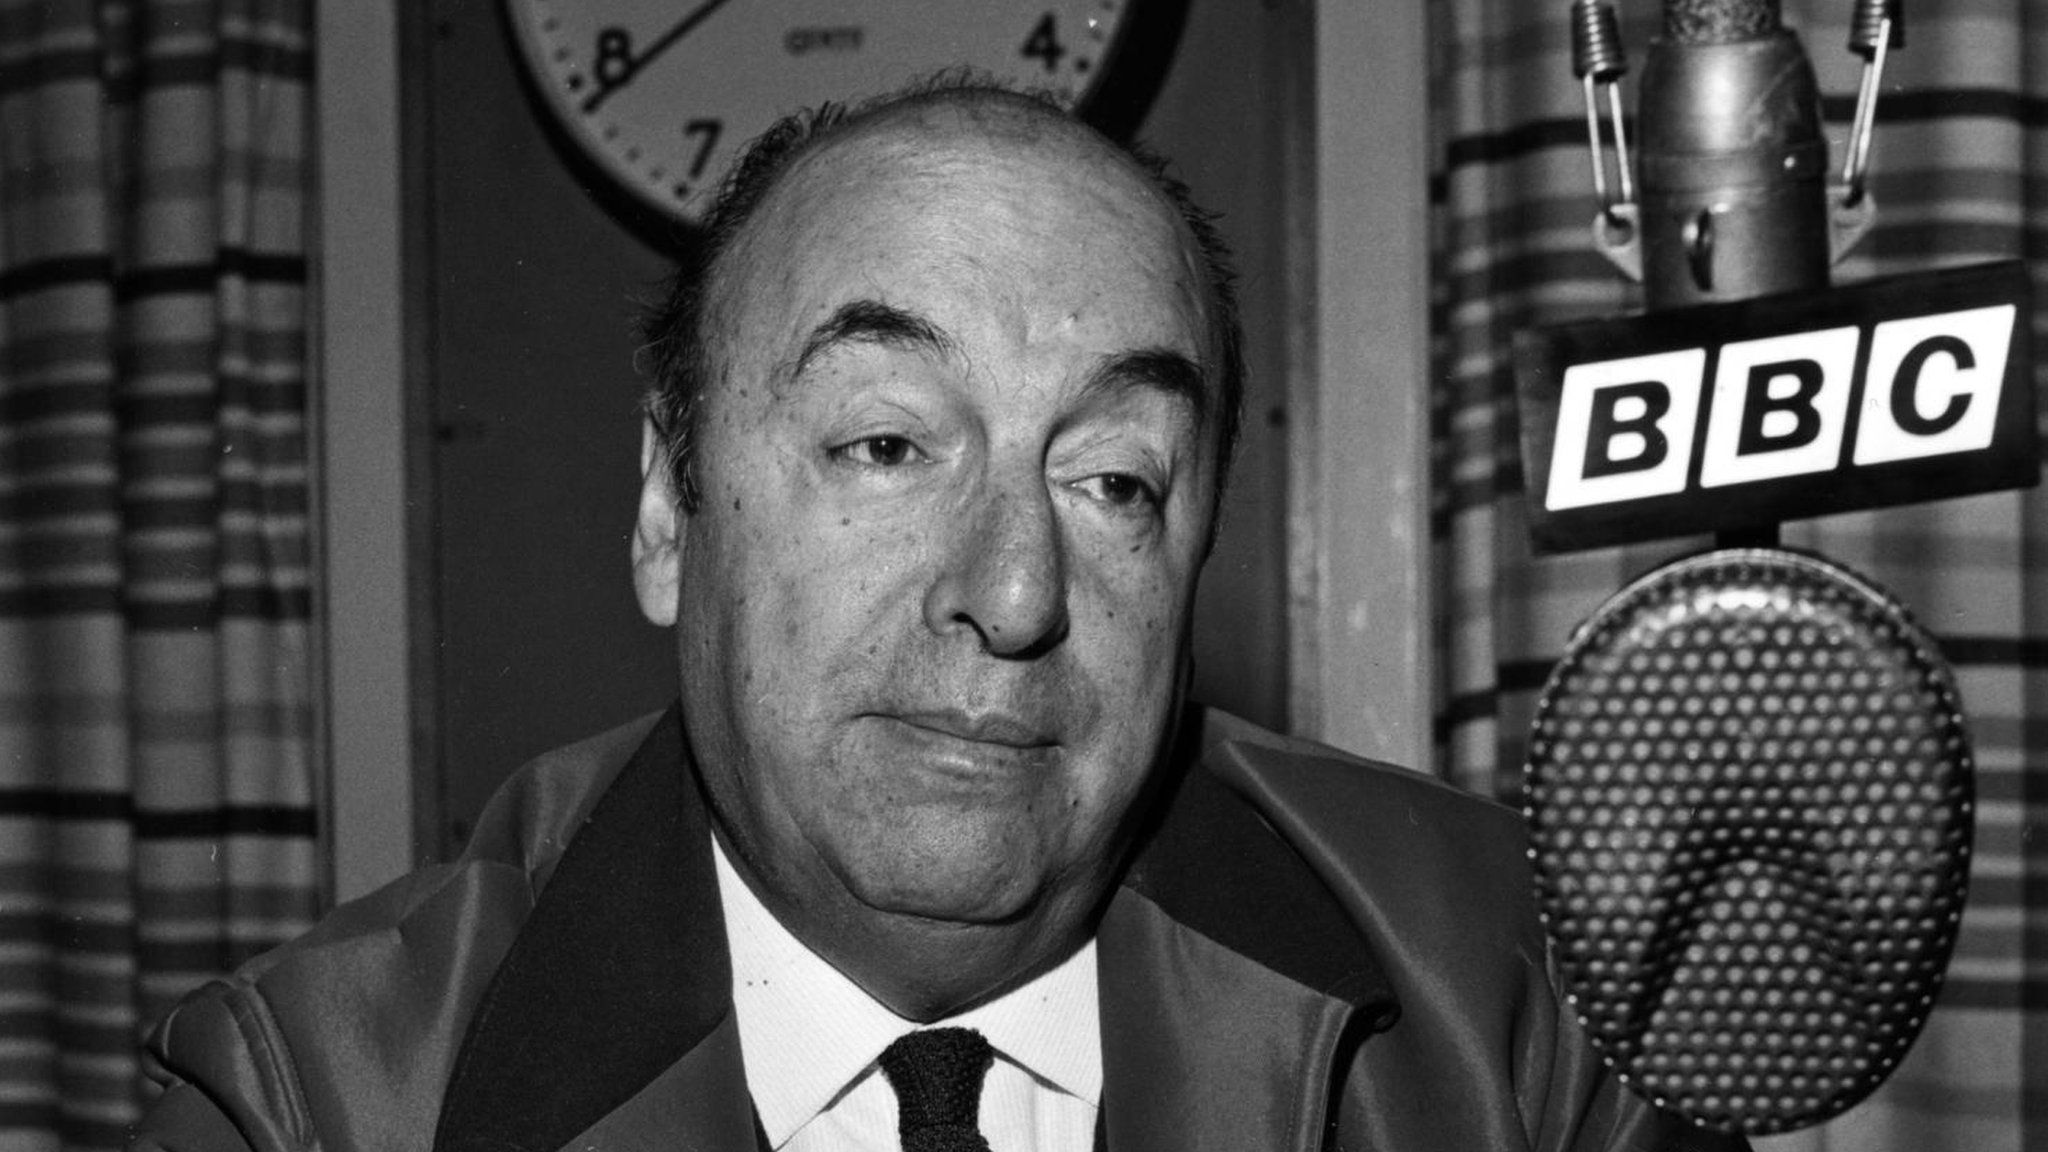 Pablo Neruda Chilean poets death still shrouded in mystery photo